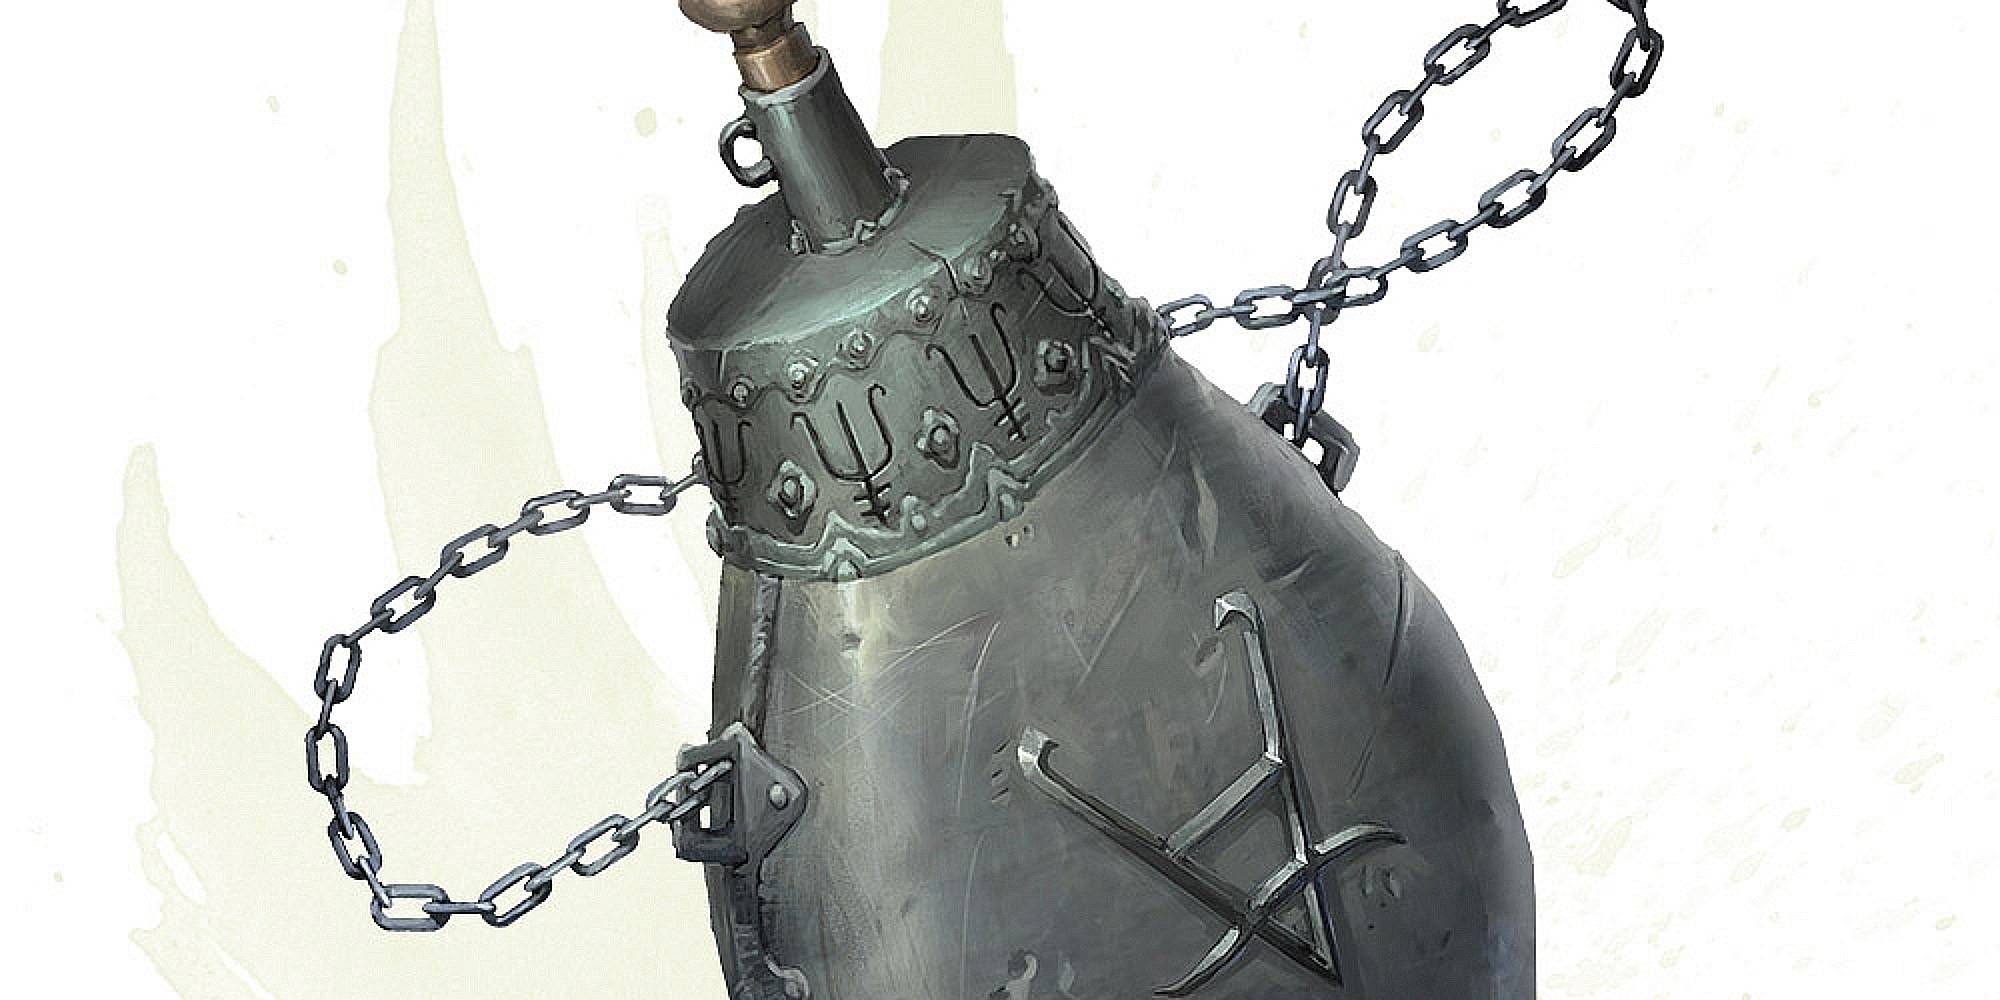 A flask made of iron sits with a chain on either side